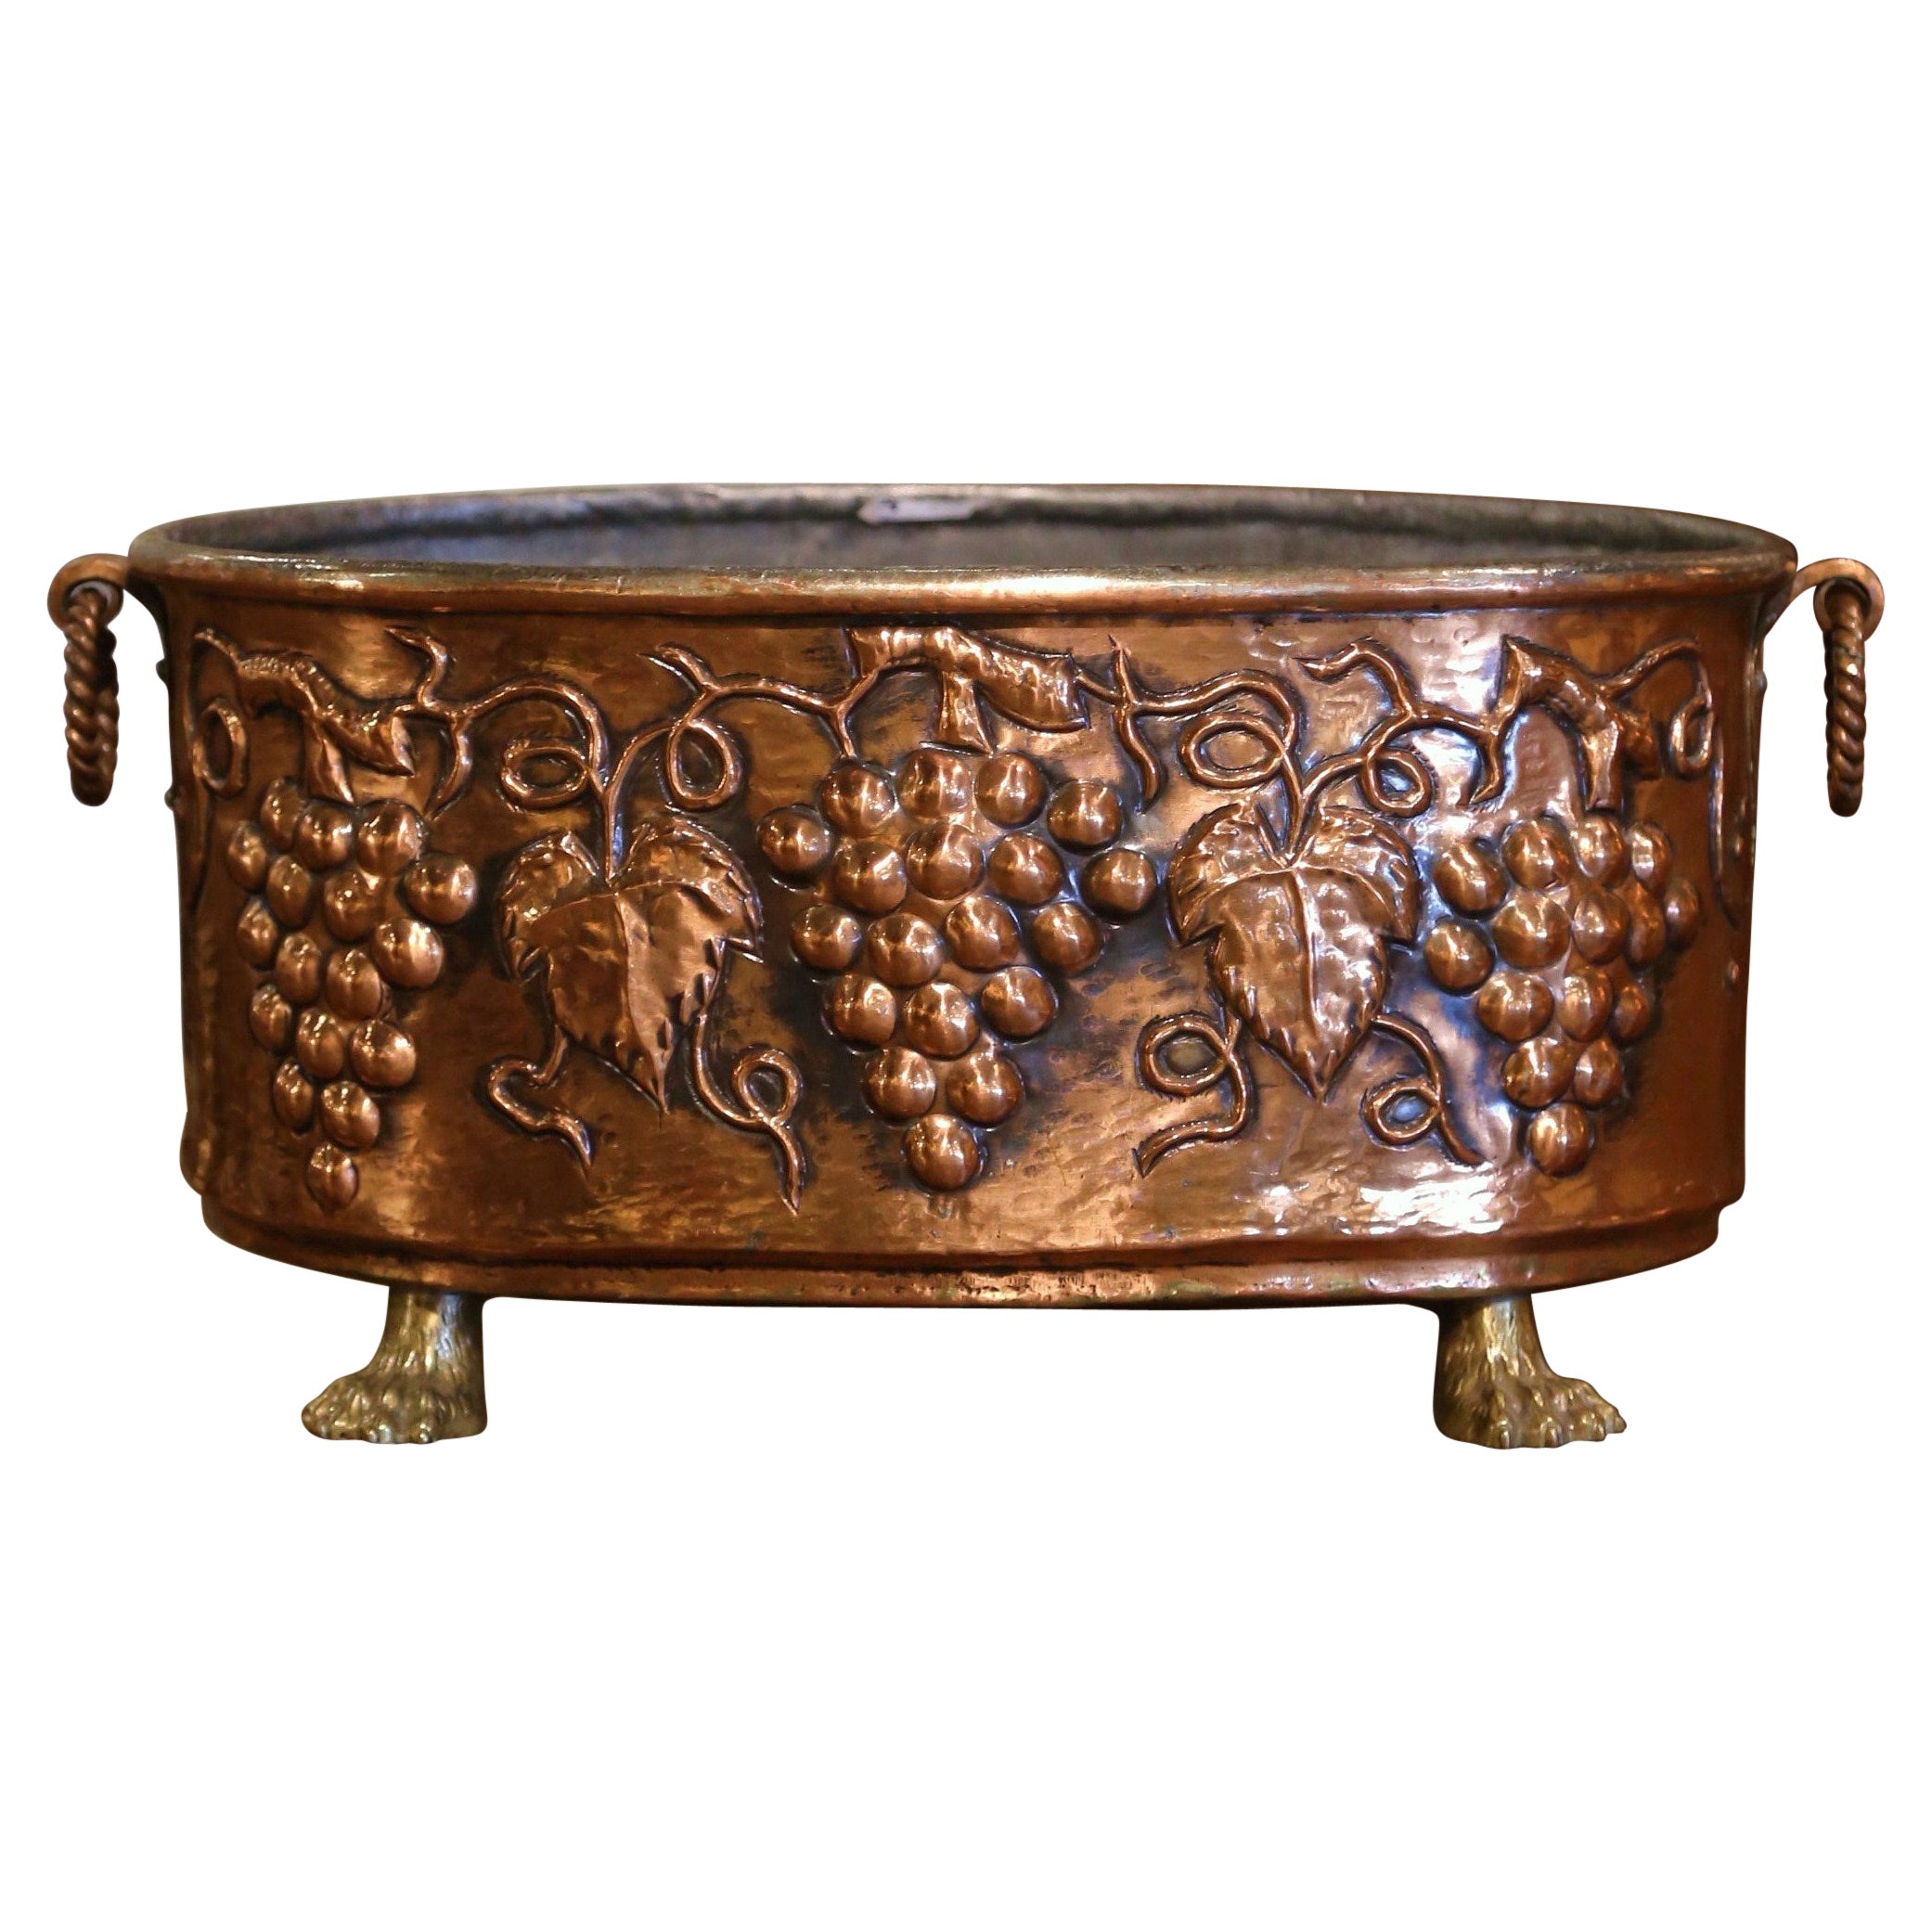 19th Century, French Brass Cache-Pot with Repousse Grape and Vine Decor